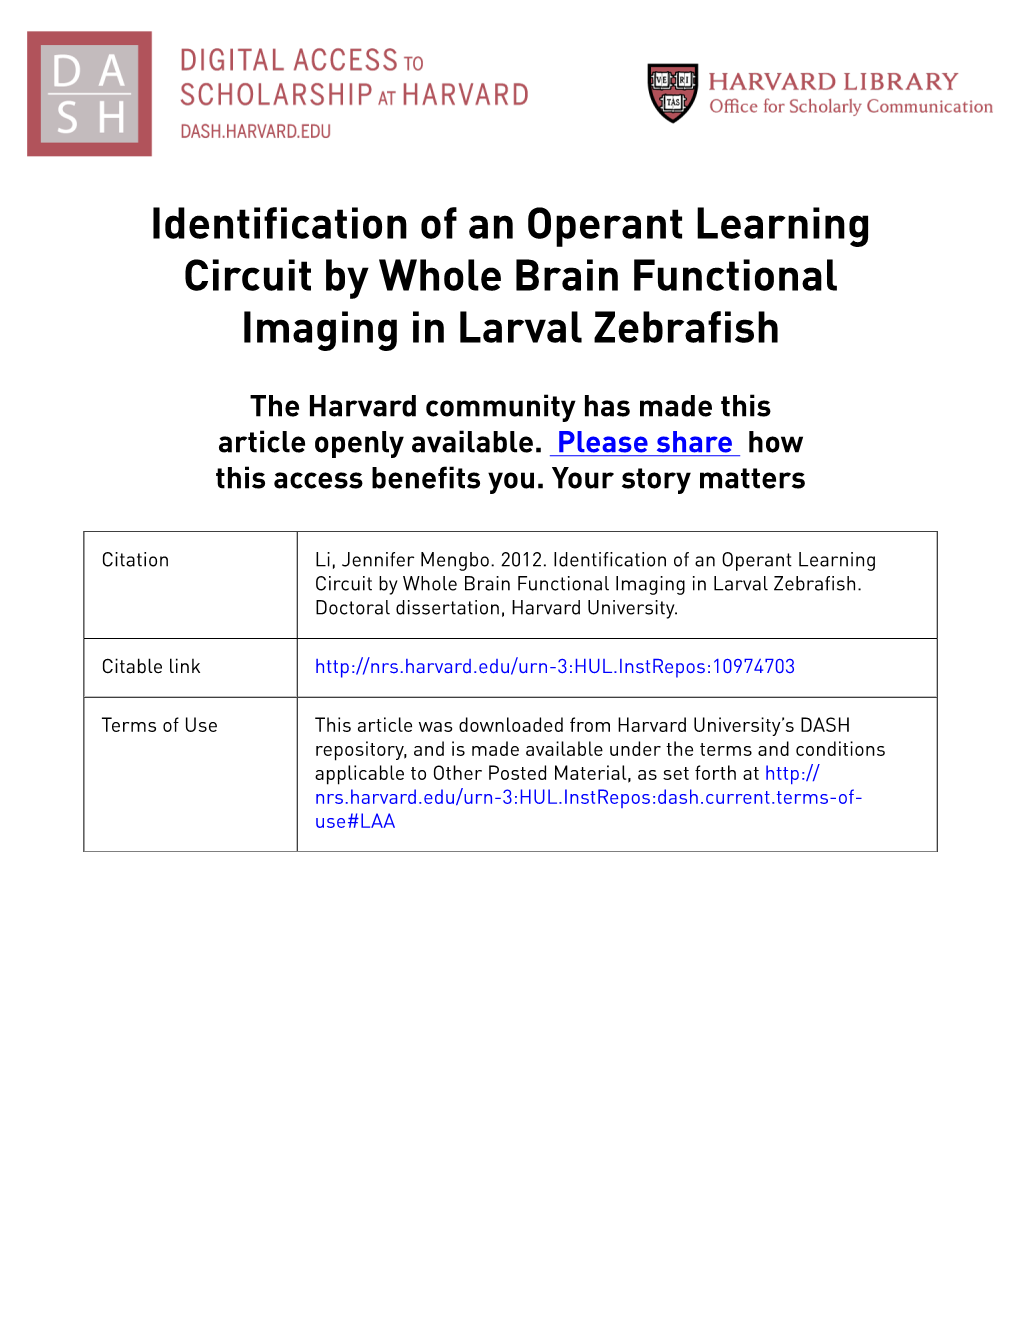 Identification of an Operant Learning Circuit by Whole Brain Functional Imaging in Larval Zebrafish